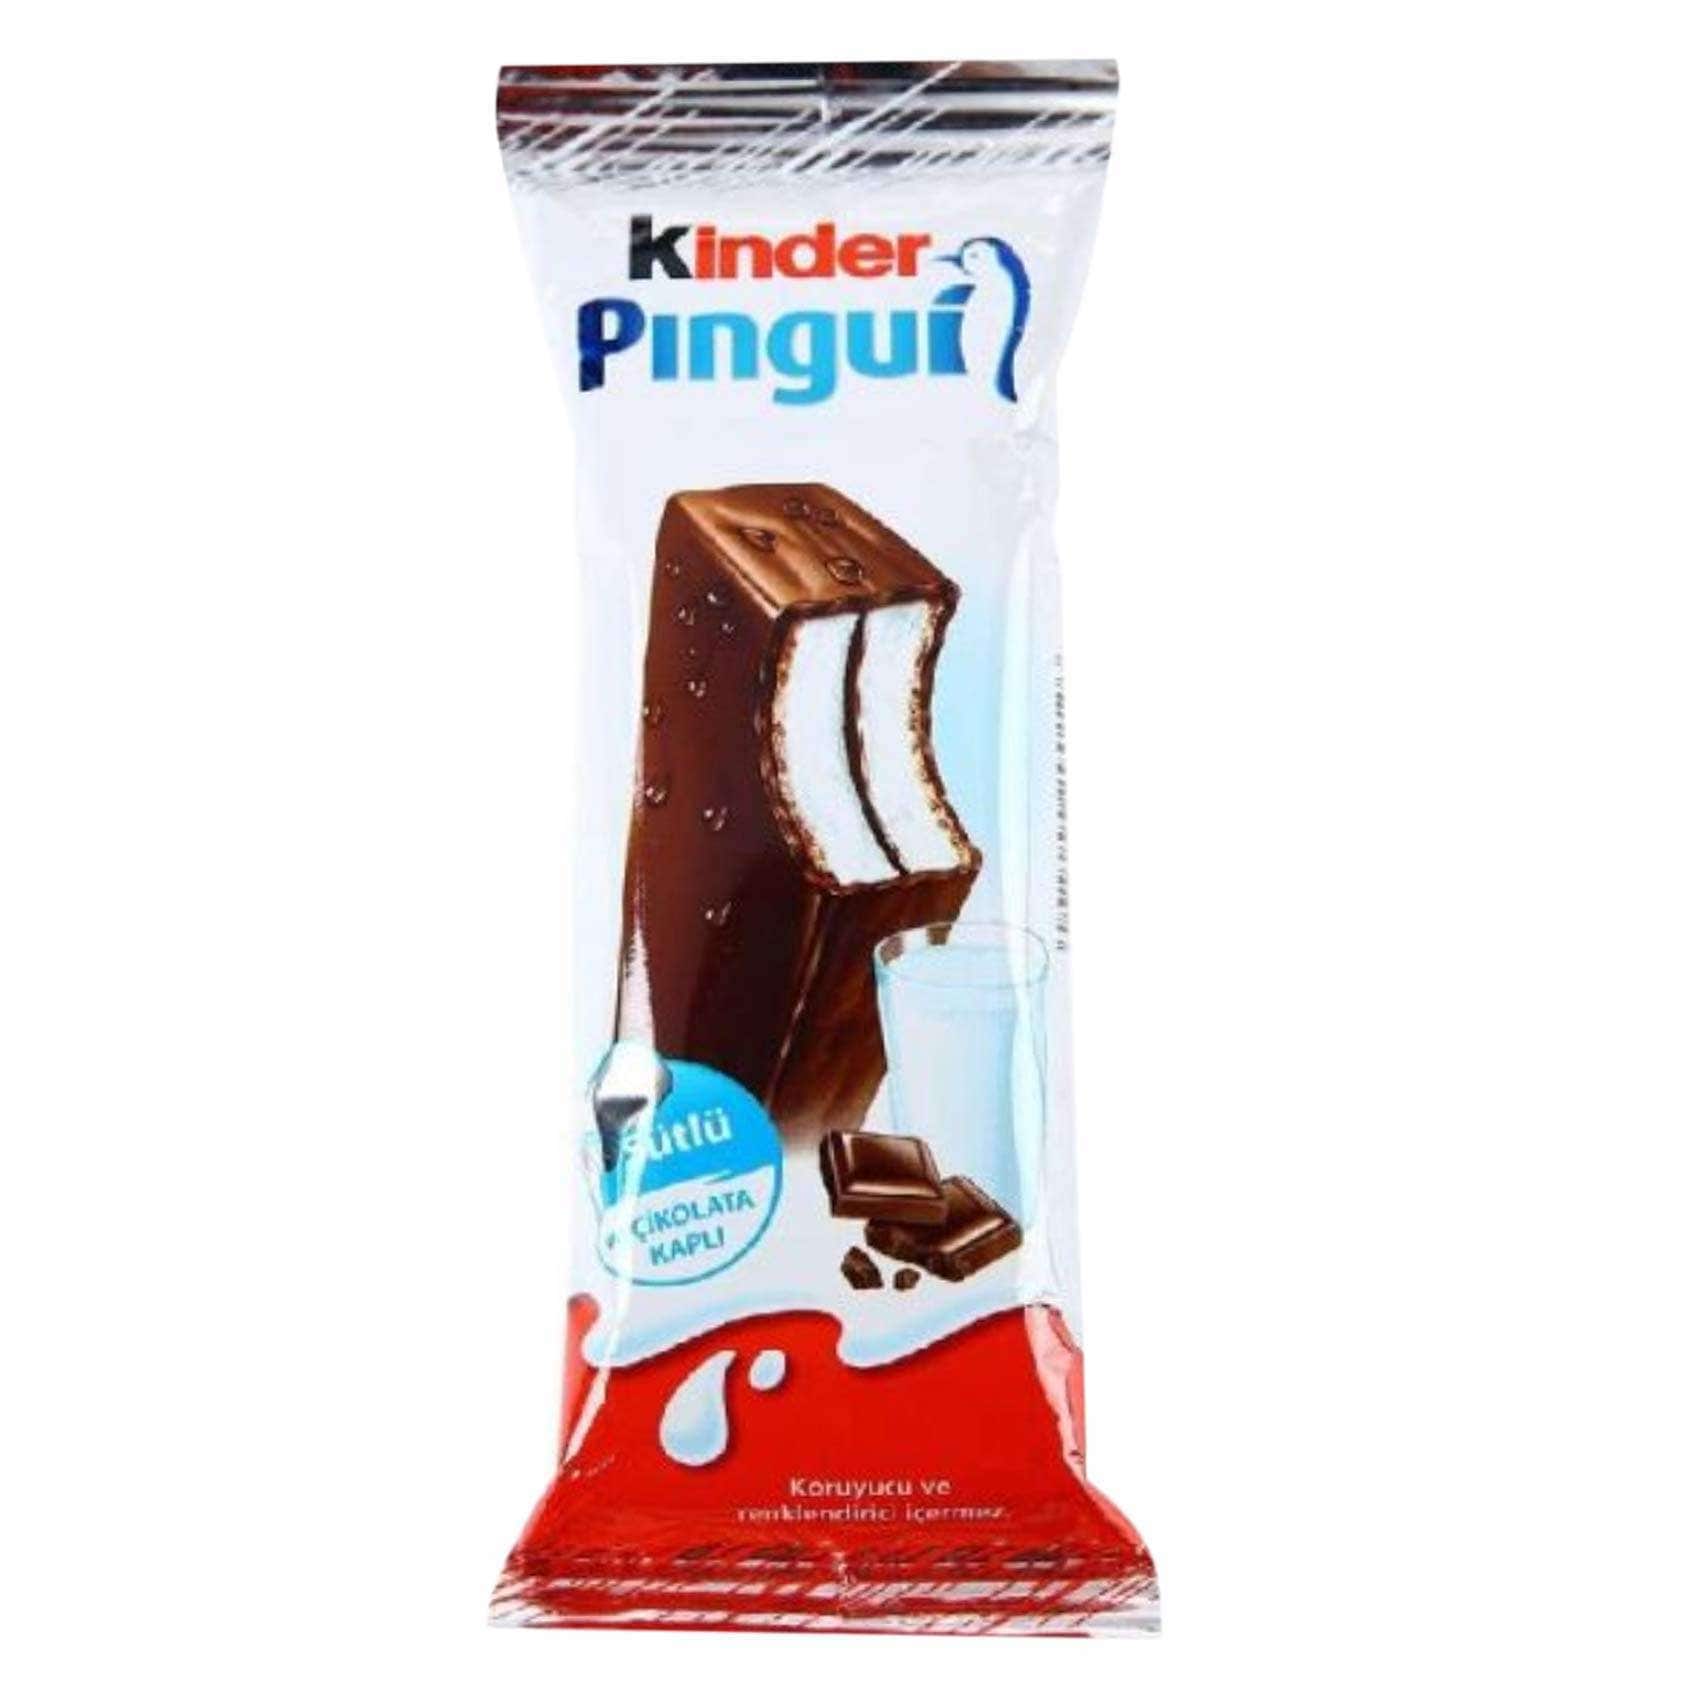 Buy Kinder Pingui Chocolate 30g Online - Shop Baby Products on ...